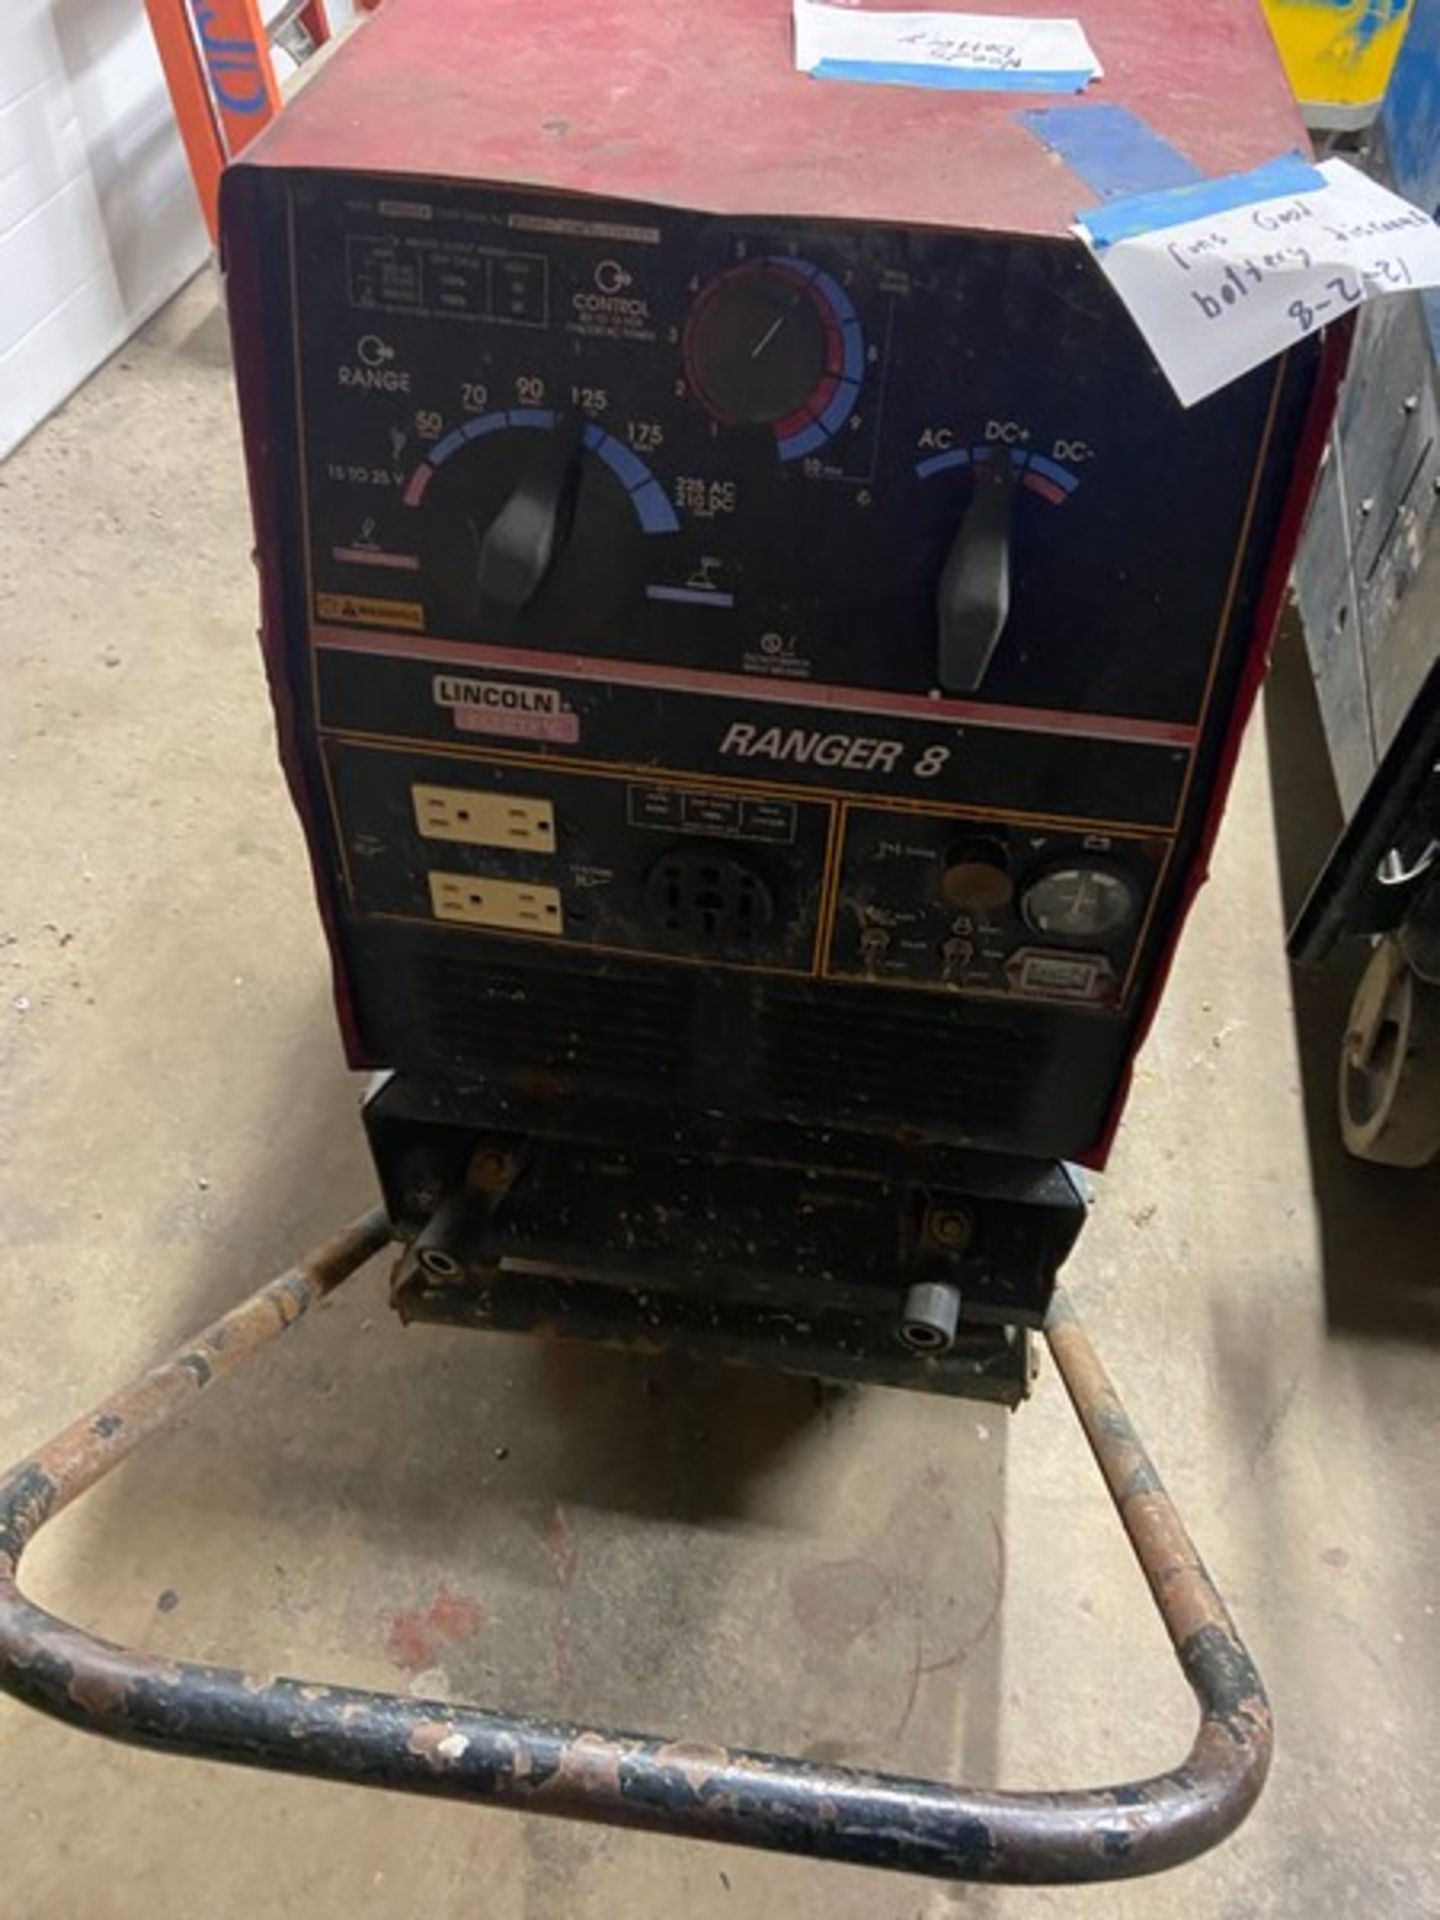 Lincoln Electric Ranger 8 Welder & Generator, with Onan Performermer 16 Engine, Mounted on - Image 2 of 6